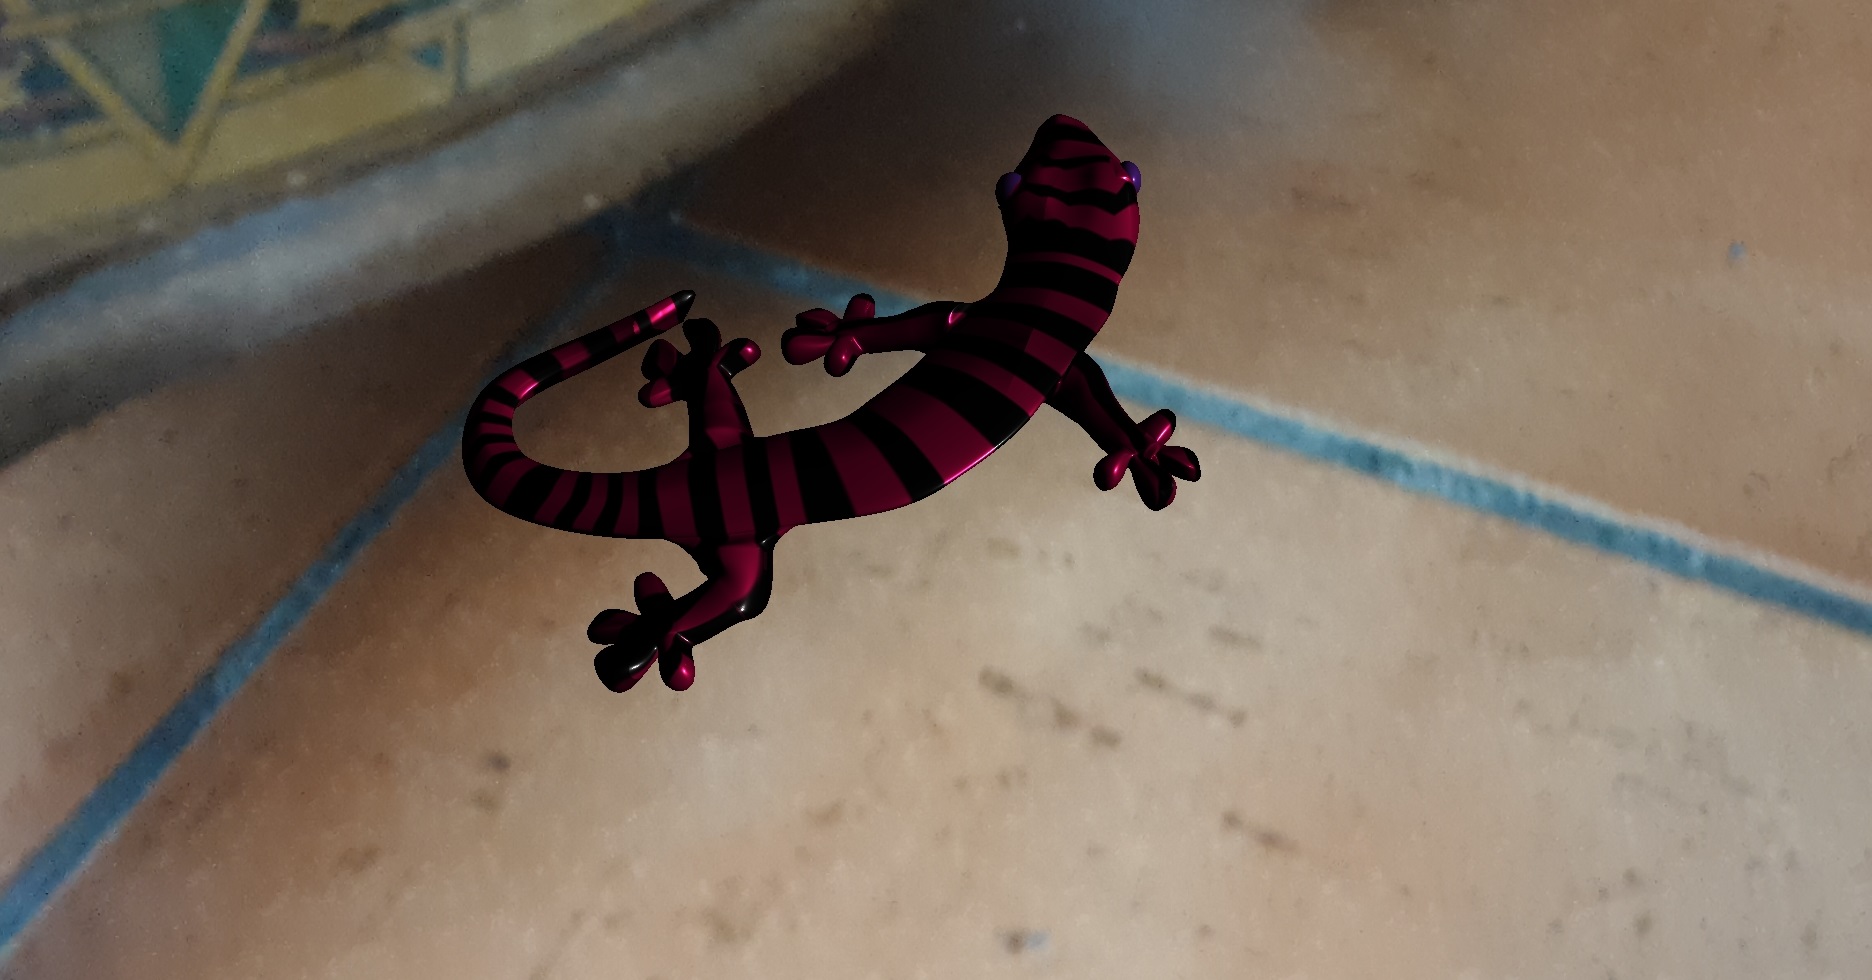 Lizards in My House